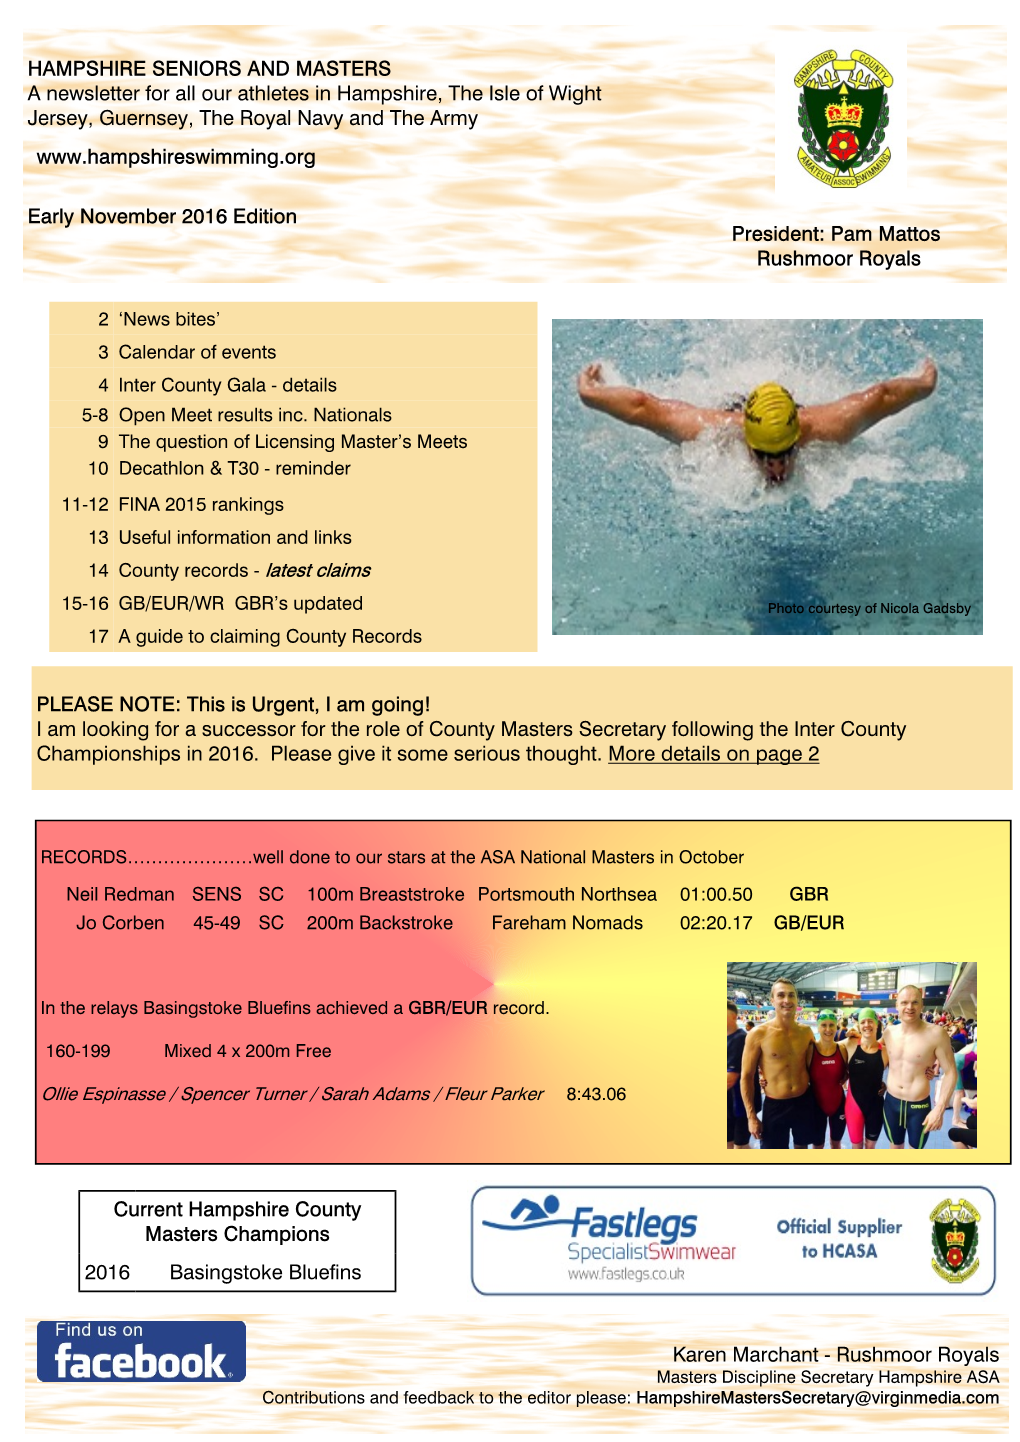 A Newsletter for All Our Athletes in Hampshire, the Isle of Wight Jersey, Guernsey, the Royal Navy and the Army 2016 Basingstoke Bluefins